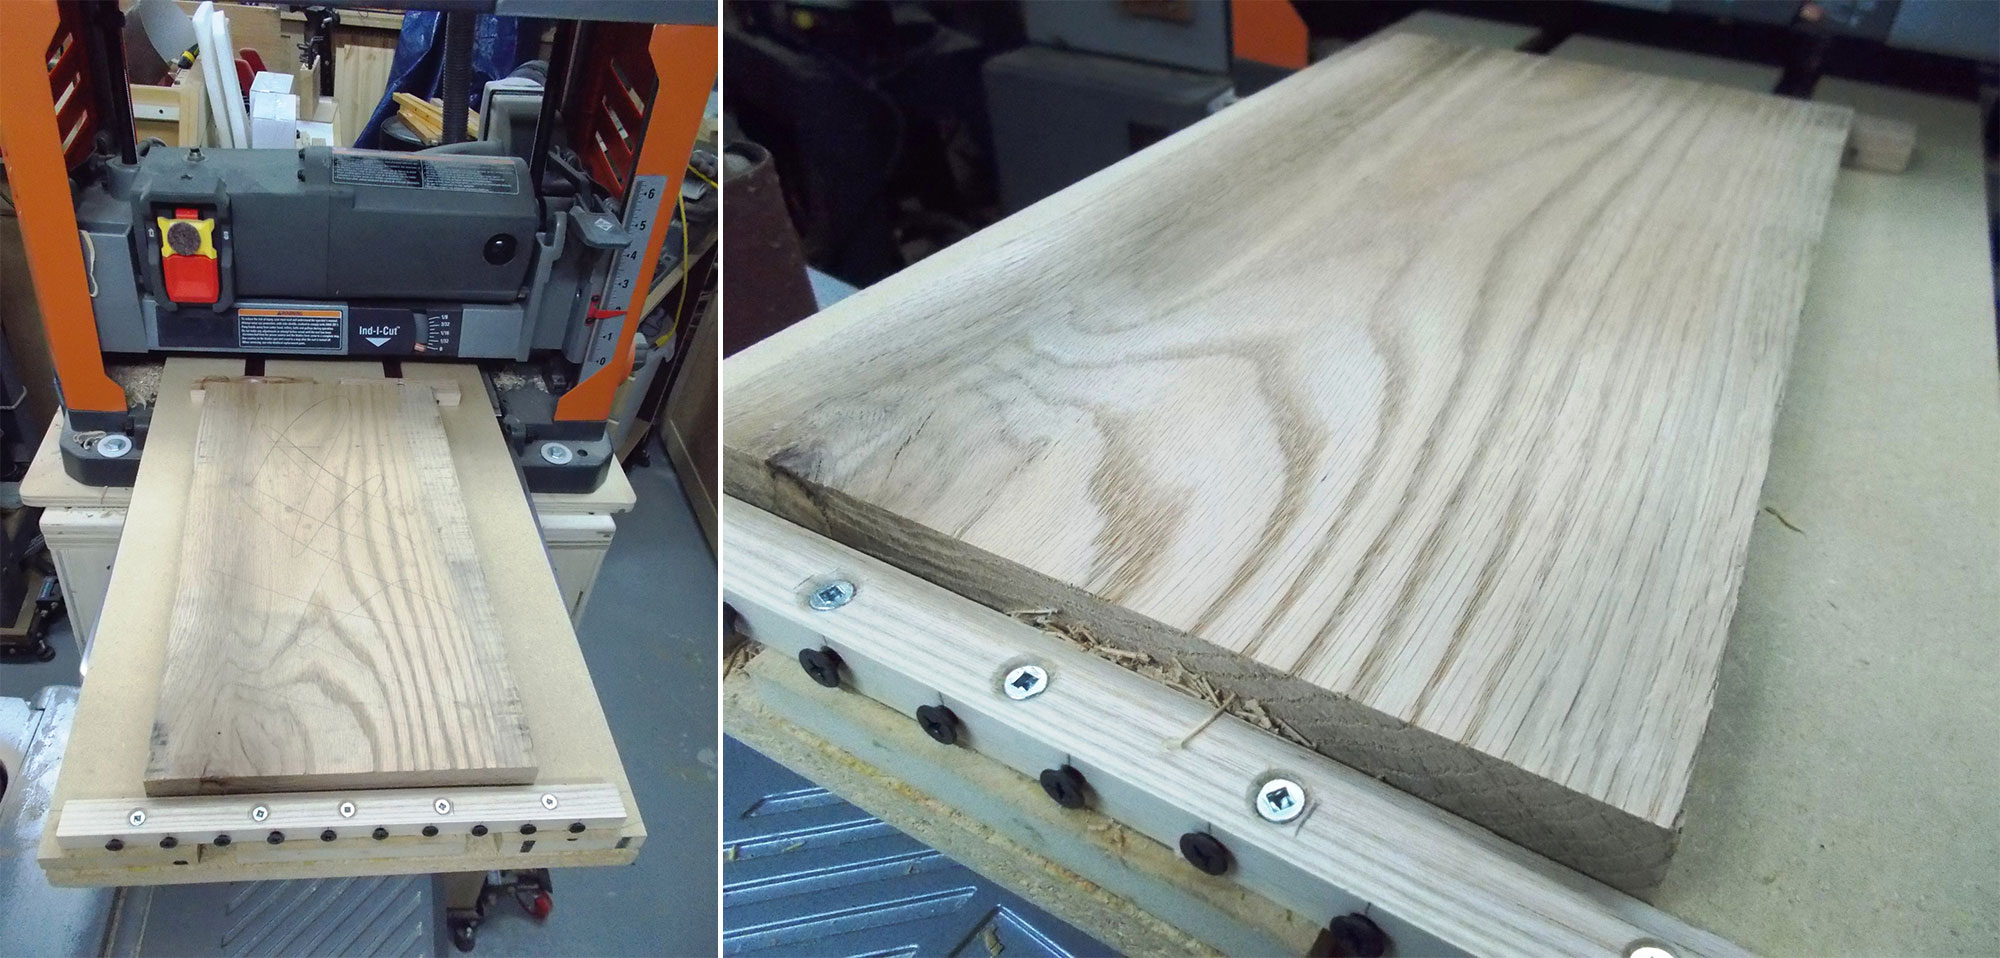 Image left: Blank on bed with thickness planer. Image right: Planed blank on bed.